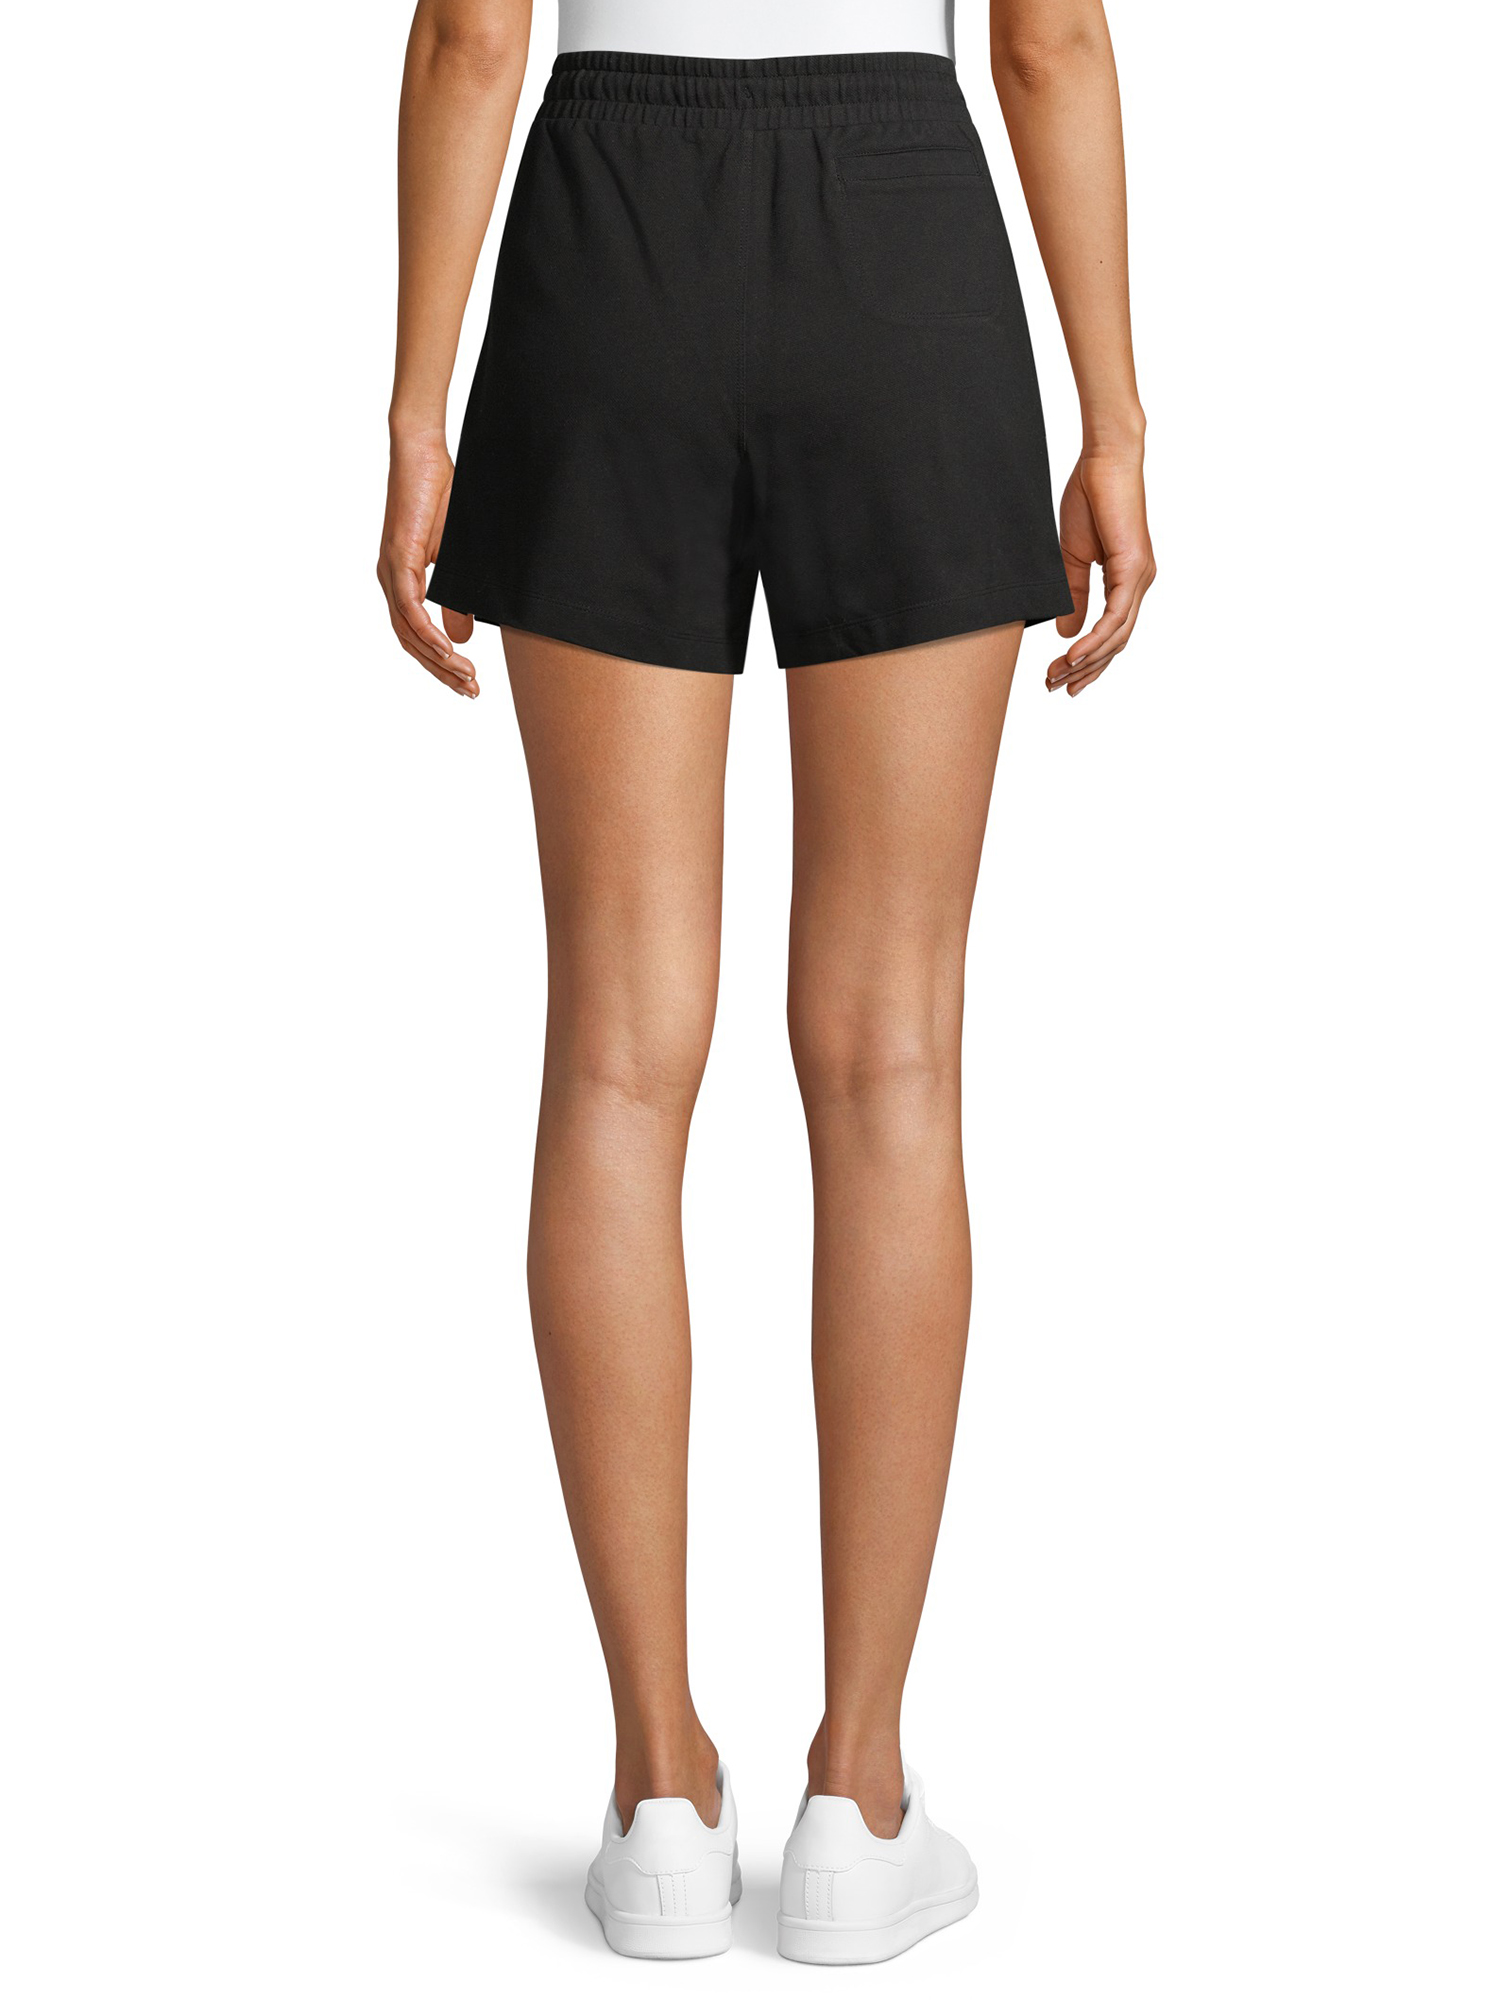 Athletic Works Women's Athleisure Commuter Shorts - image 2 of 7